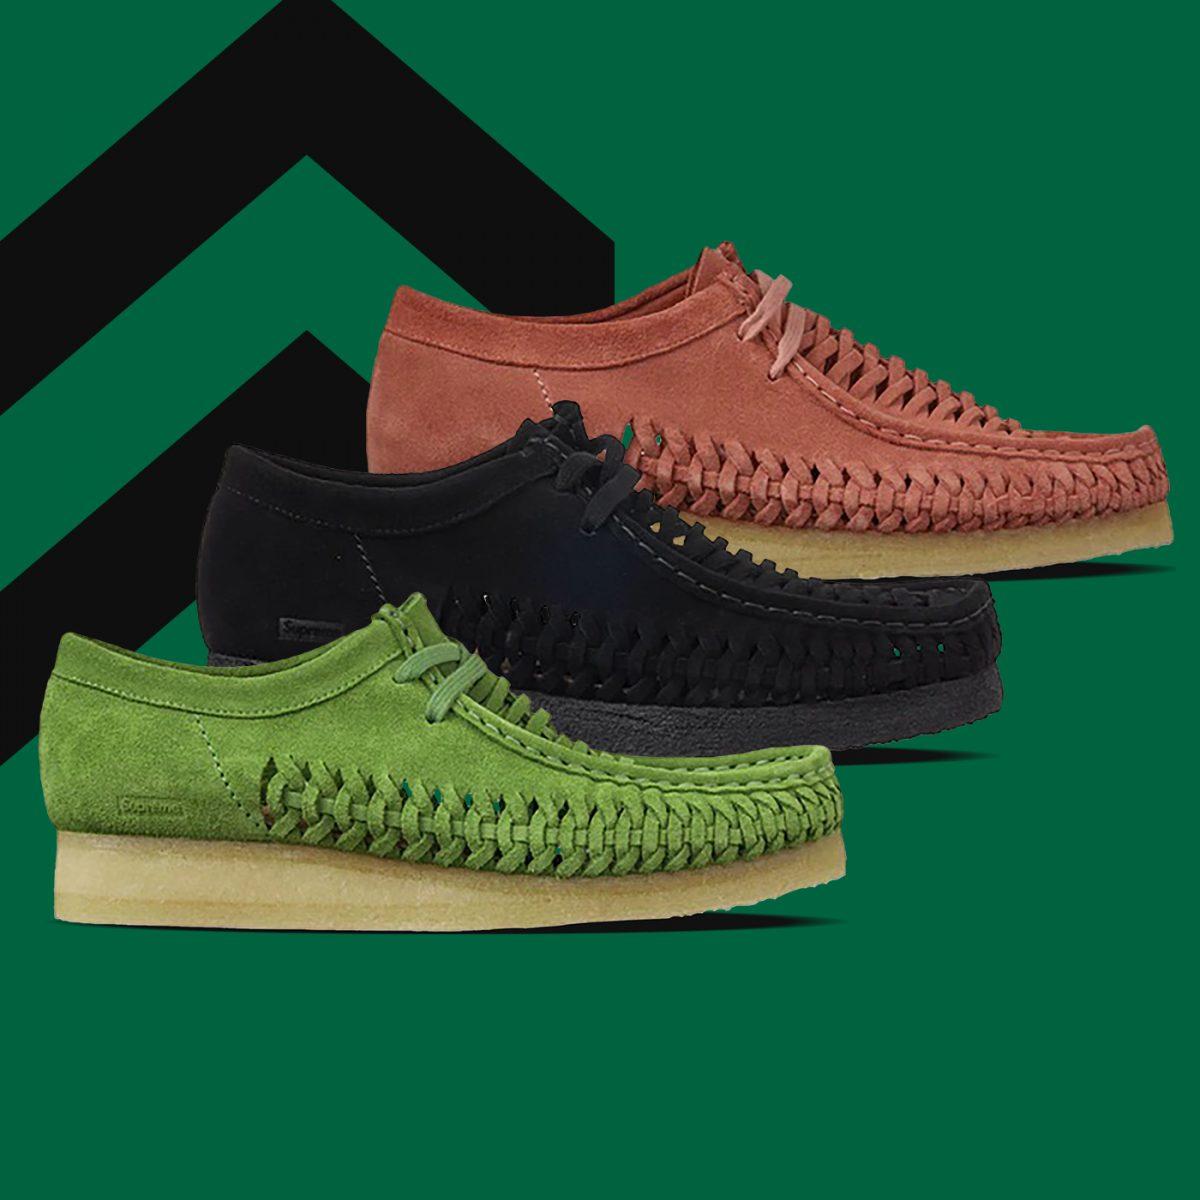 Supreme Clarks Originals Woven Wallabee: Supreme Pick of the Week